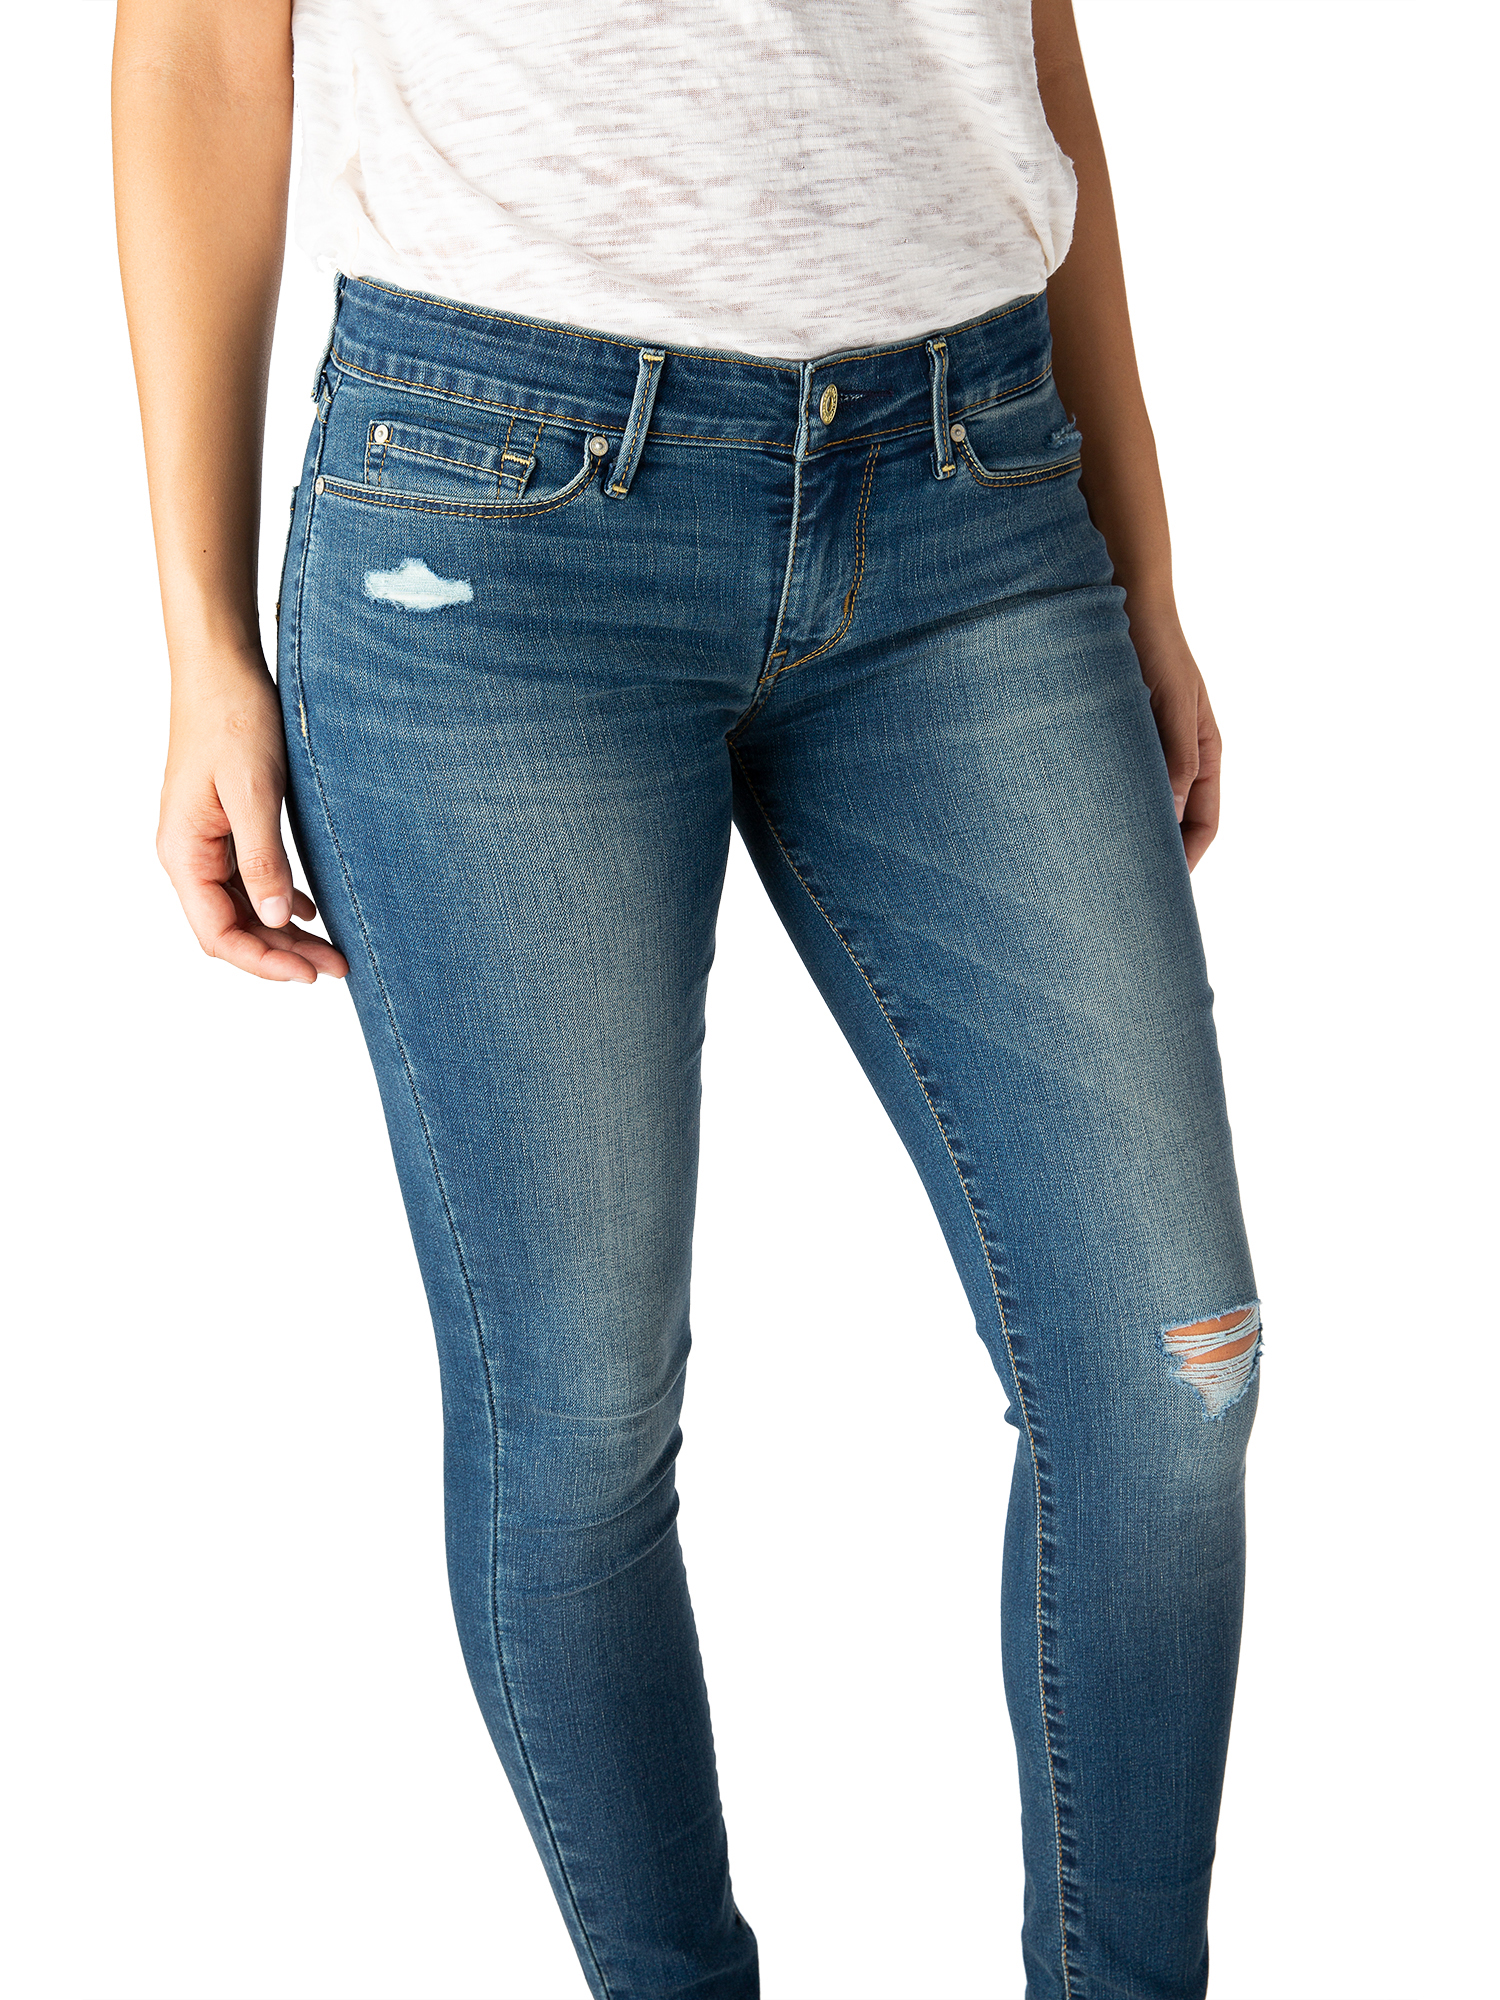 Signature by Levi Strauss & Co. Women's Low Rise Jeggings - image 5 of 12